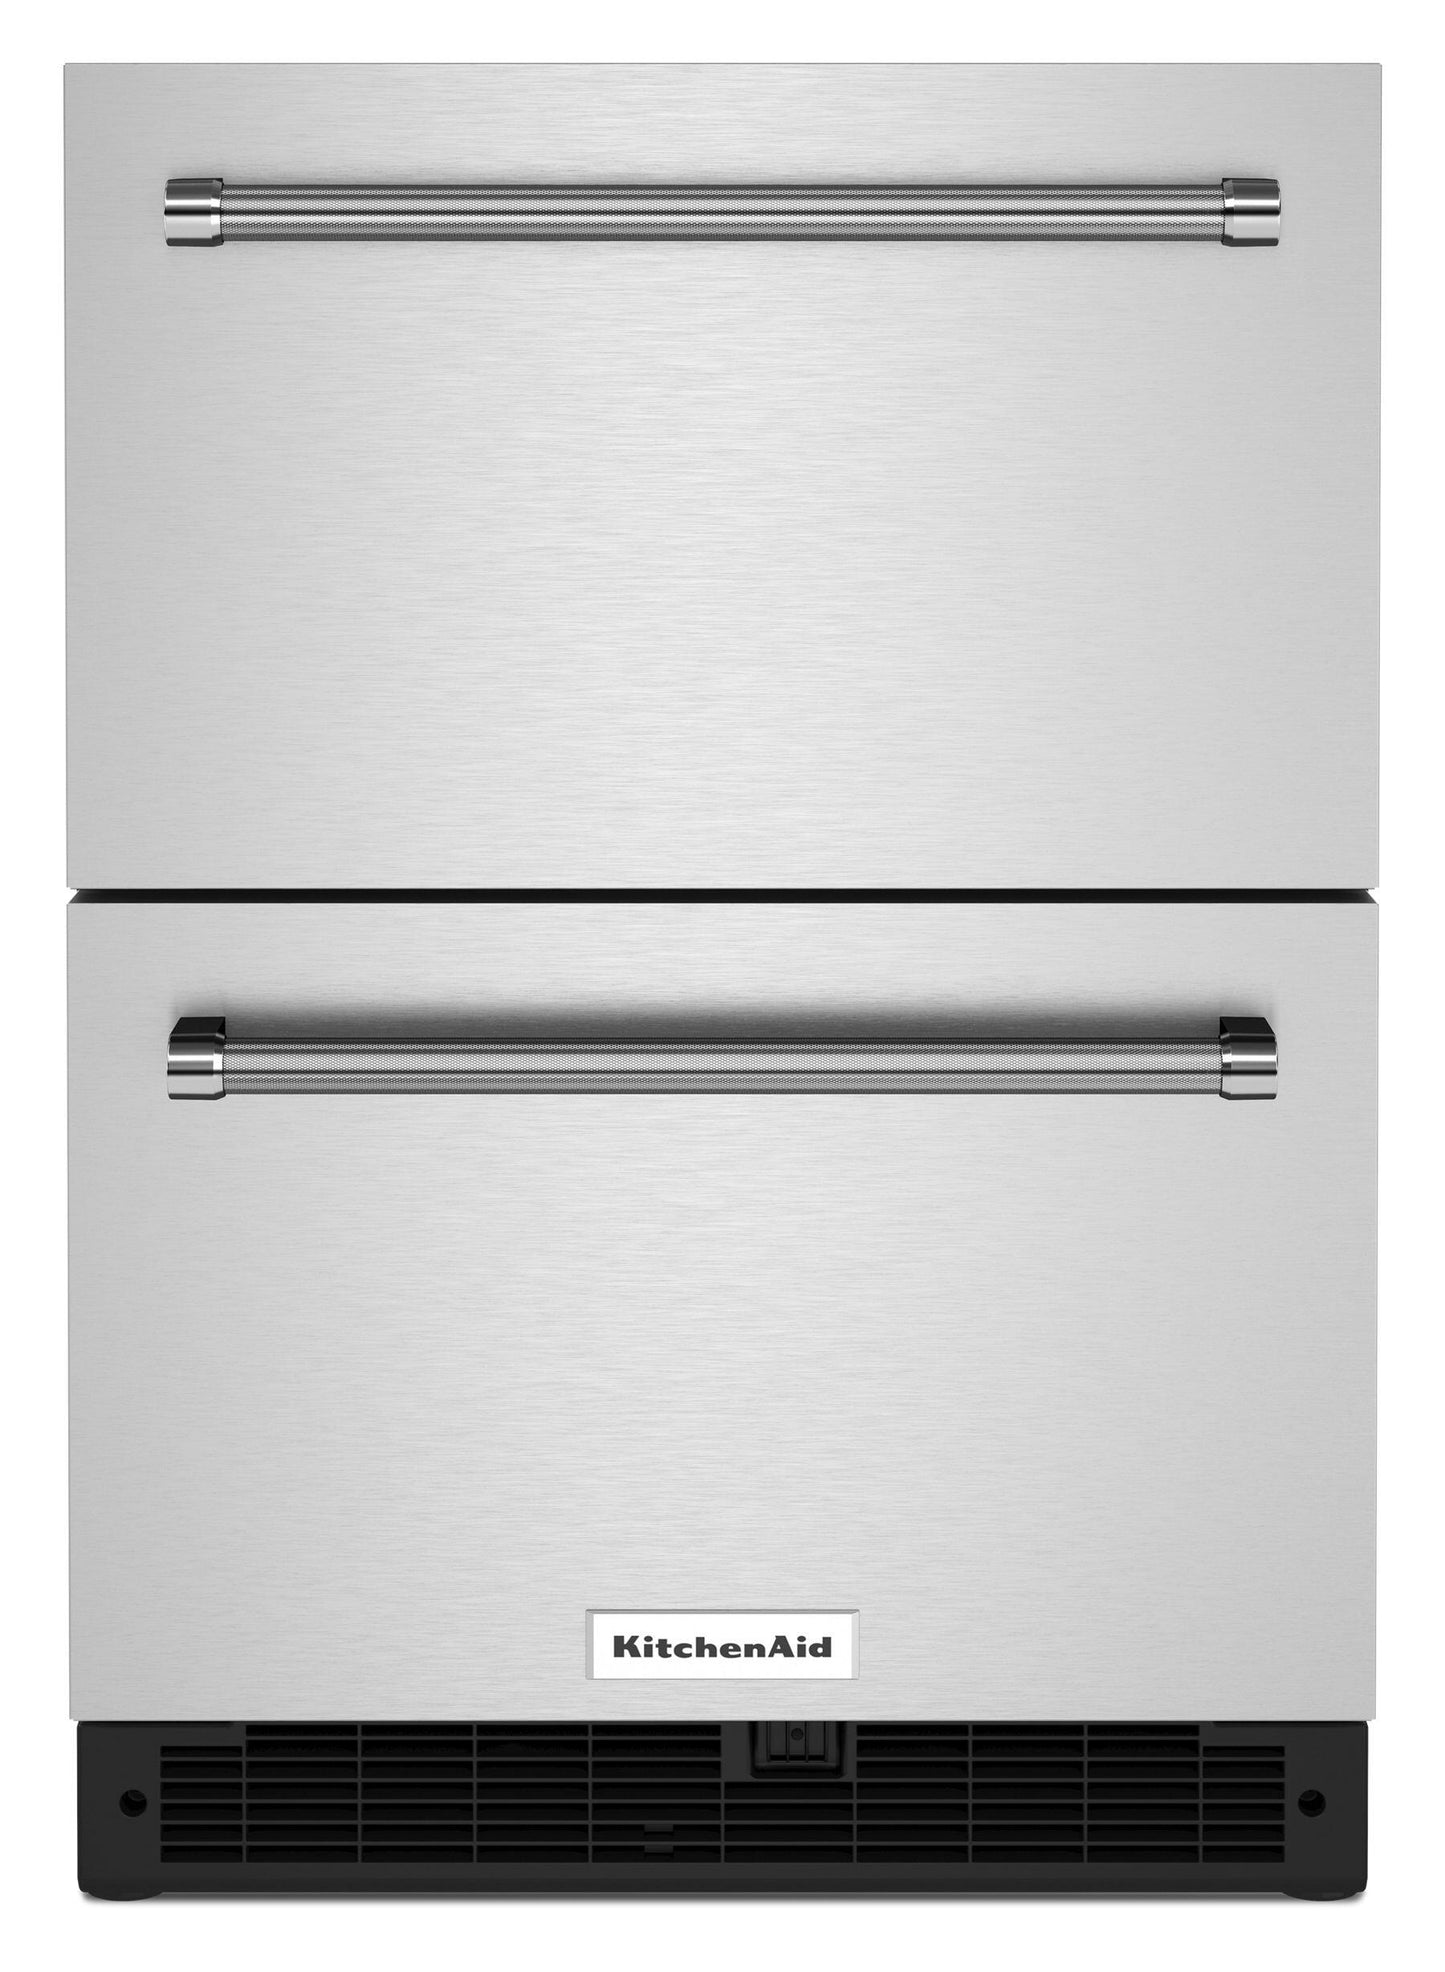 Kitchenaid KUDR204KSB 24" Stainless Steel Undercounter Double-Drawer Refrigerator - Black Cabinet/Stainless Doors